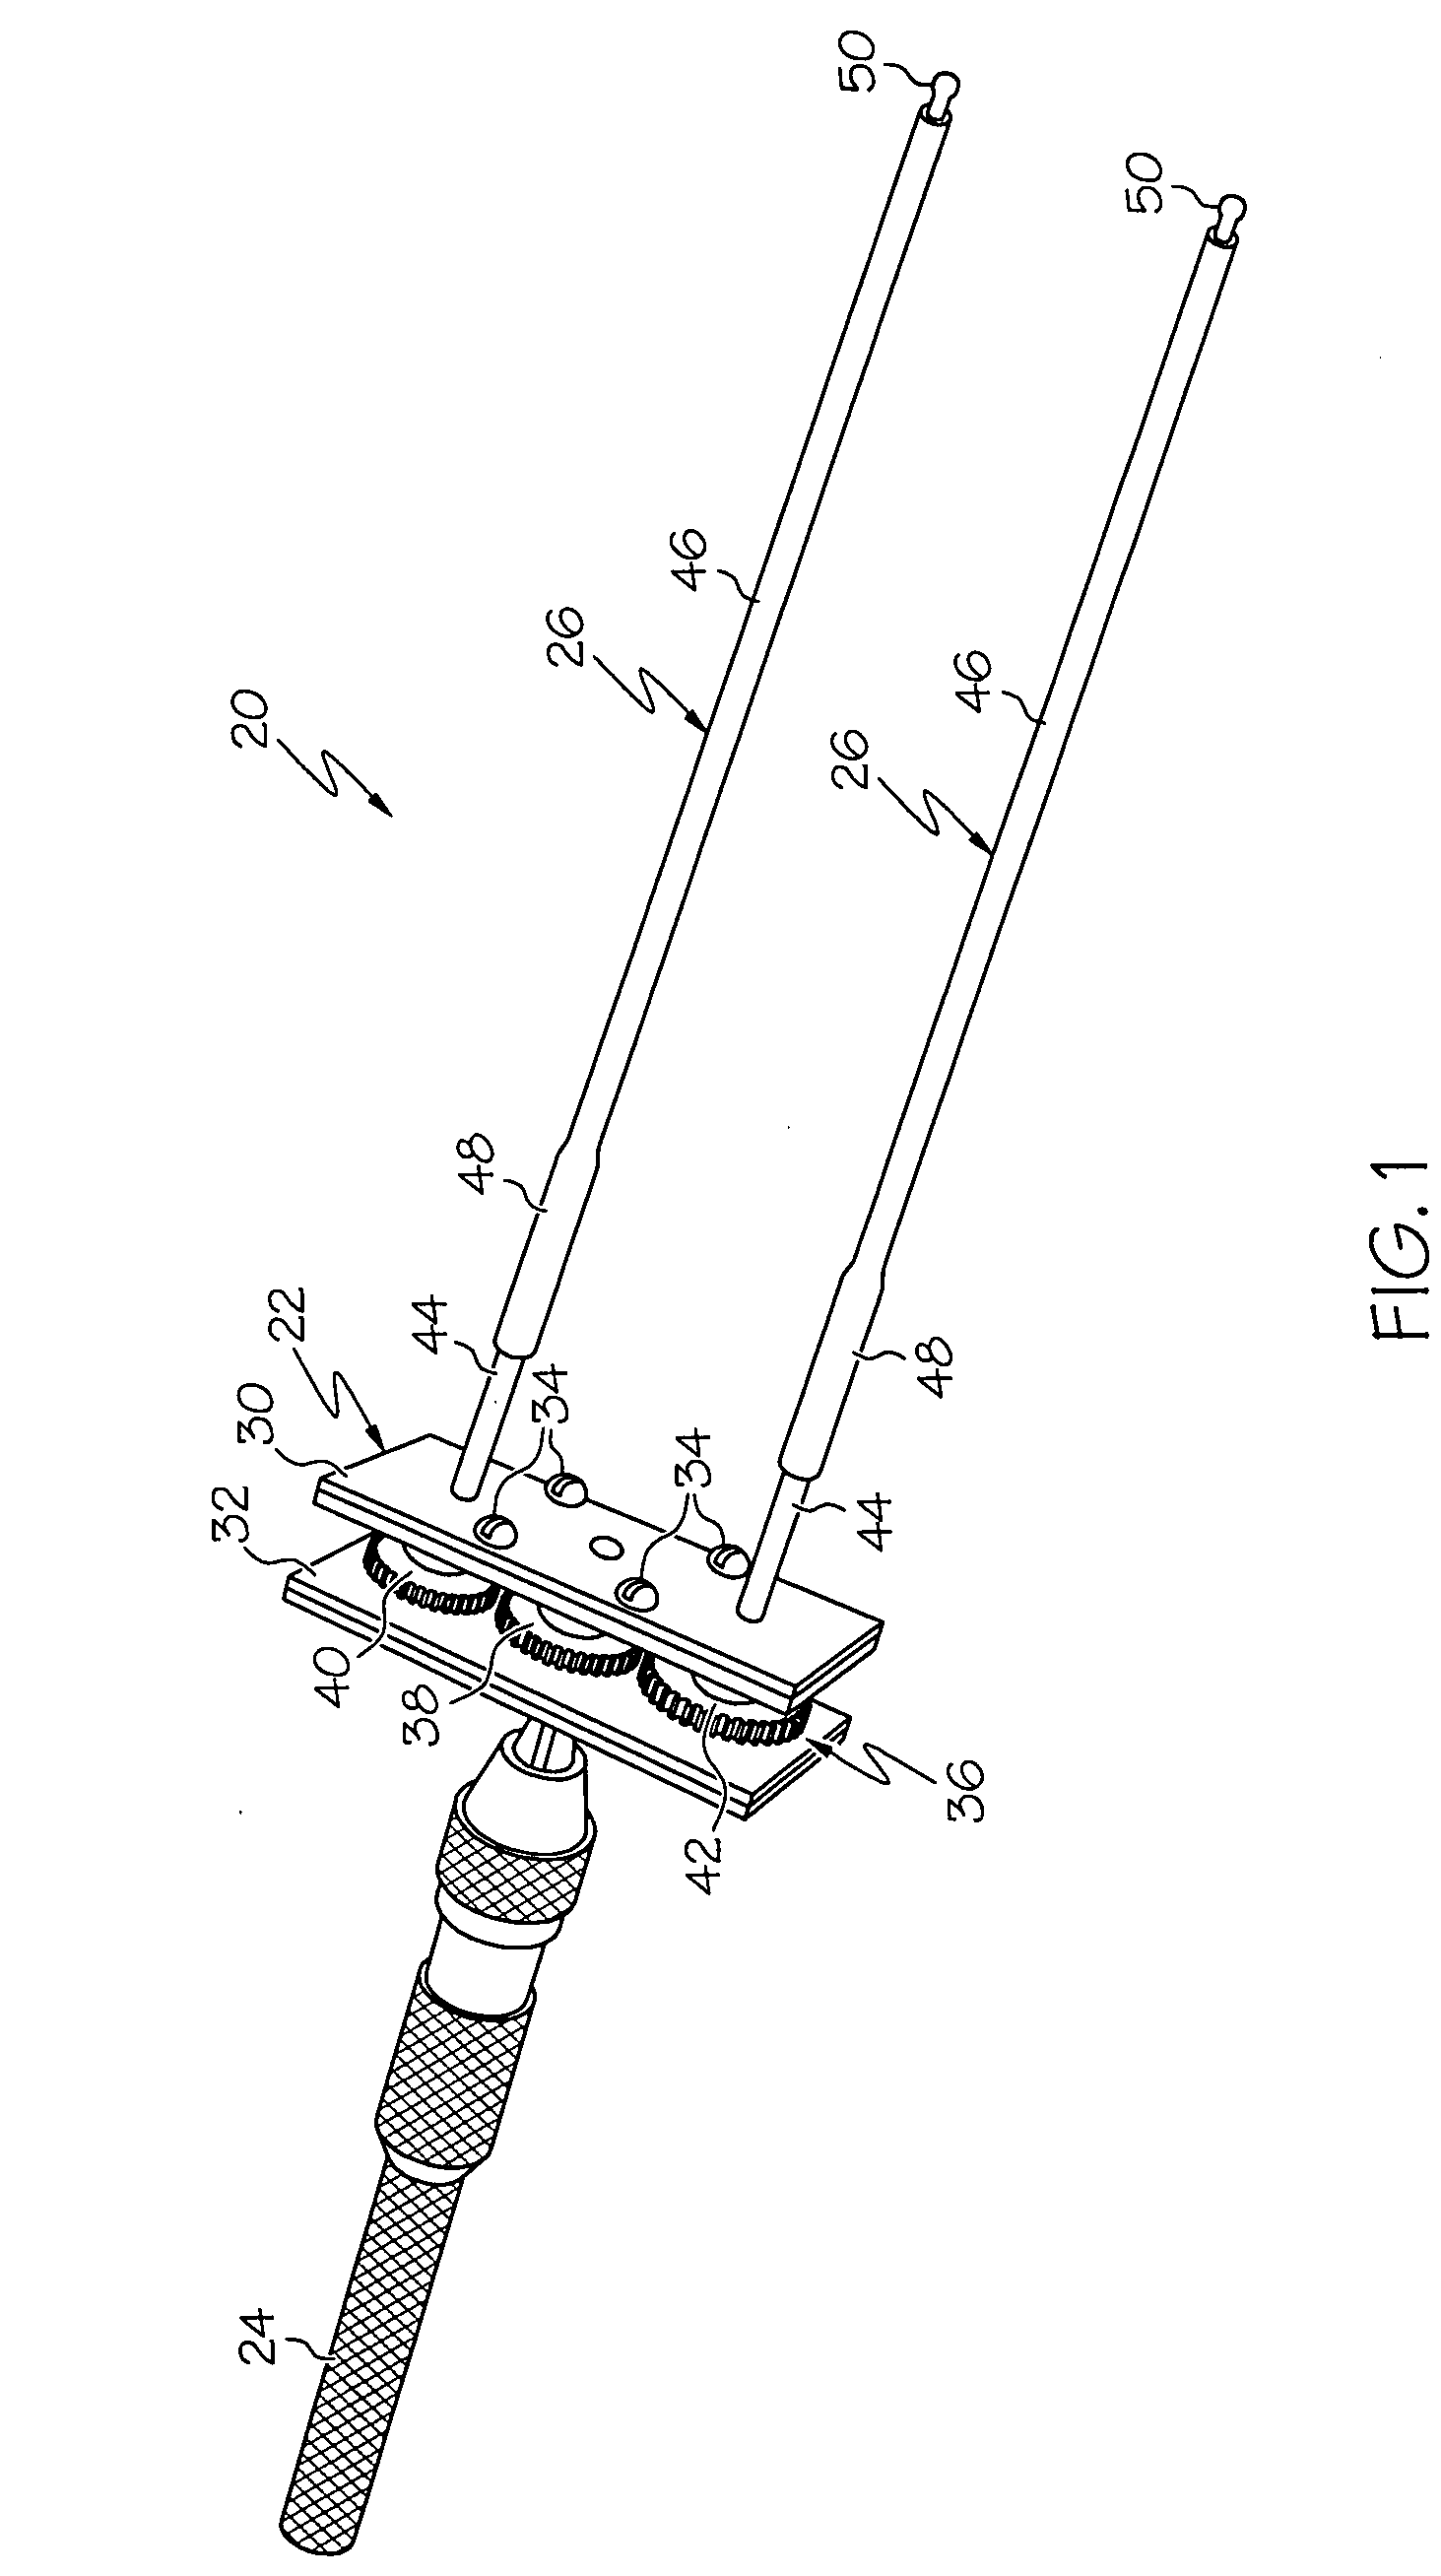 Dual screwdriver adaptable to connector assemblies of different types and sizes